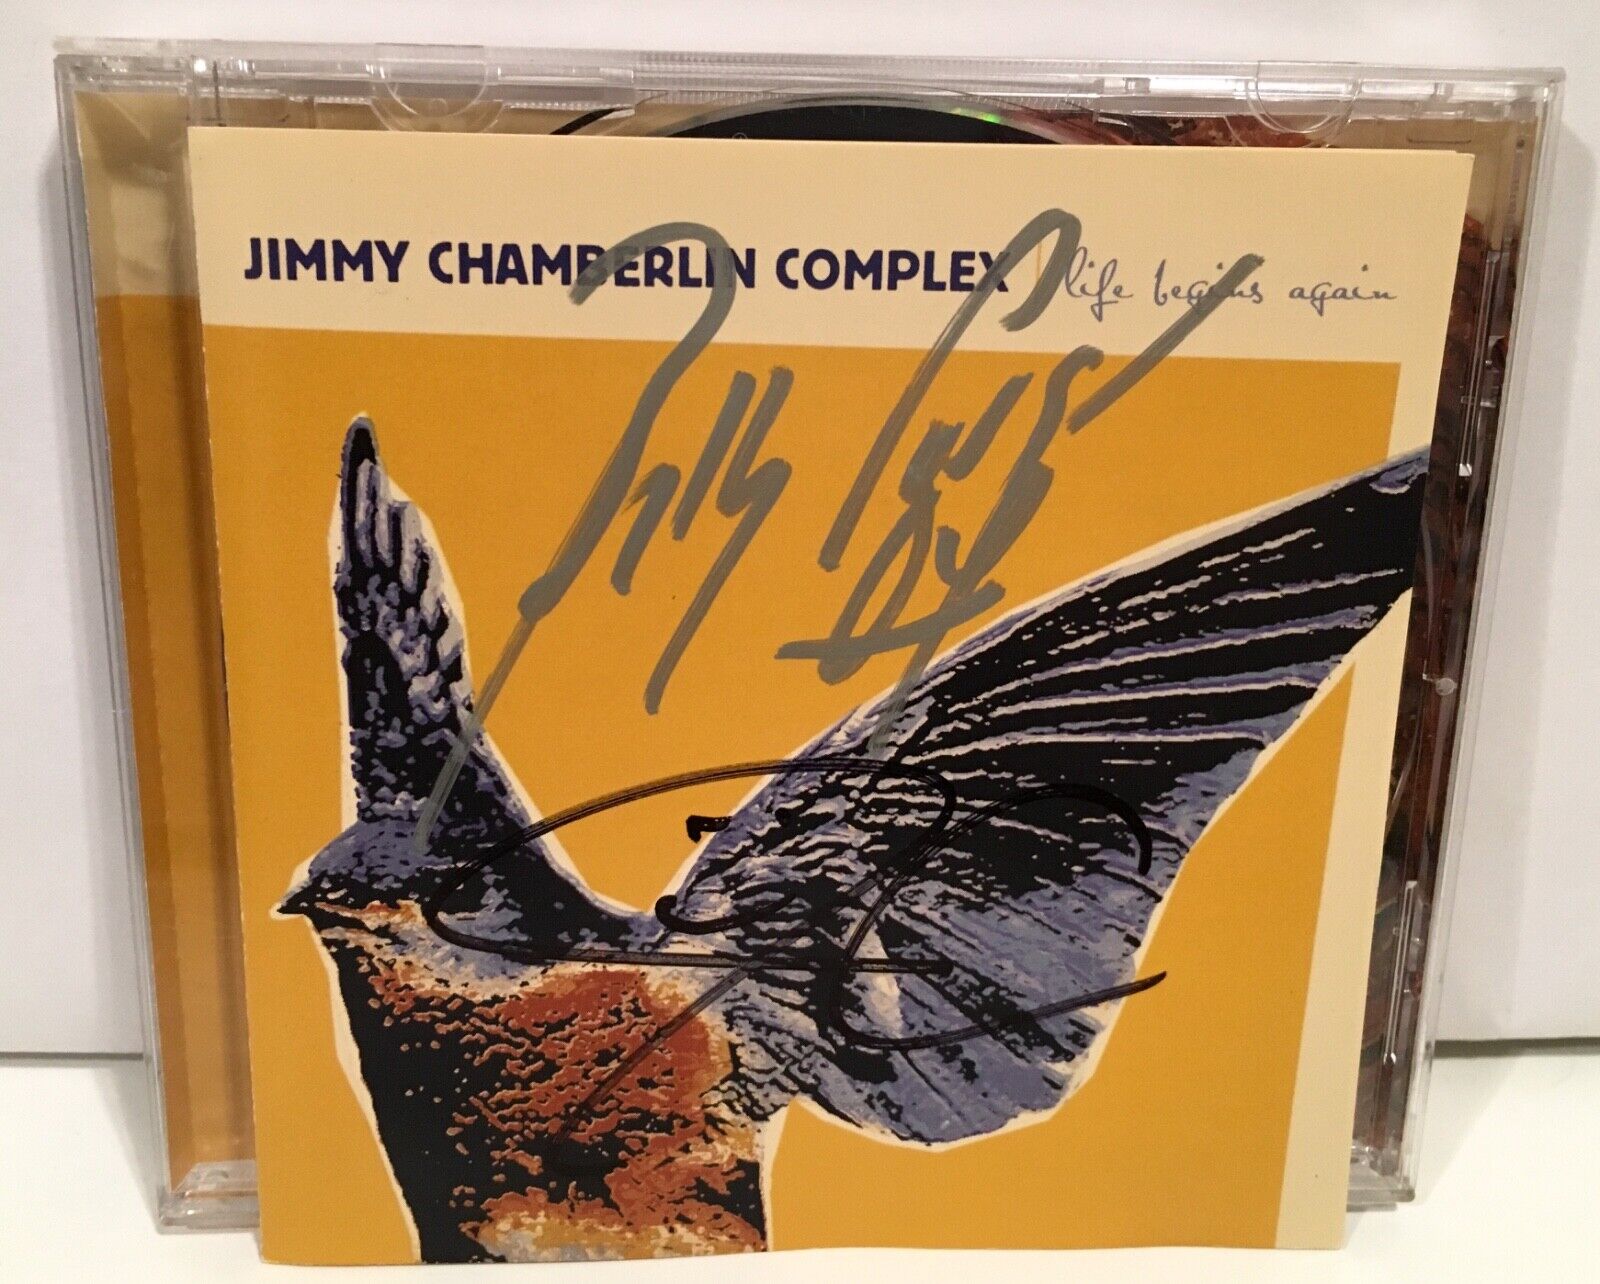 BILLY CORGAN & JIMMY CHAMBERLIN AUTOGRAPH SIGNED COMPLEX LIFE BEGINS AGAIN CD 